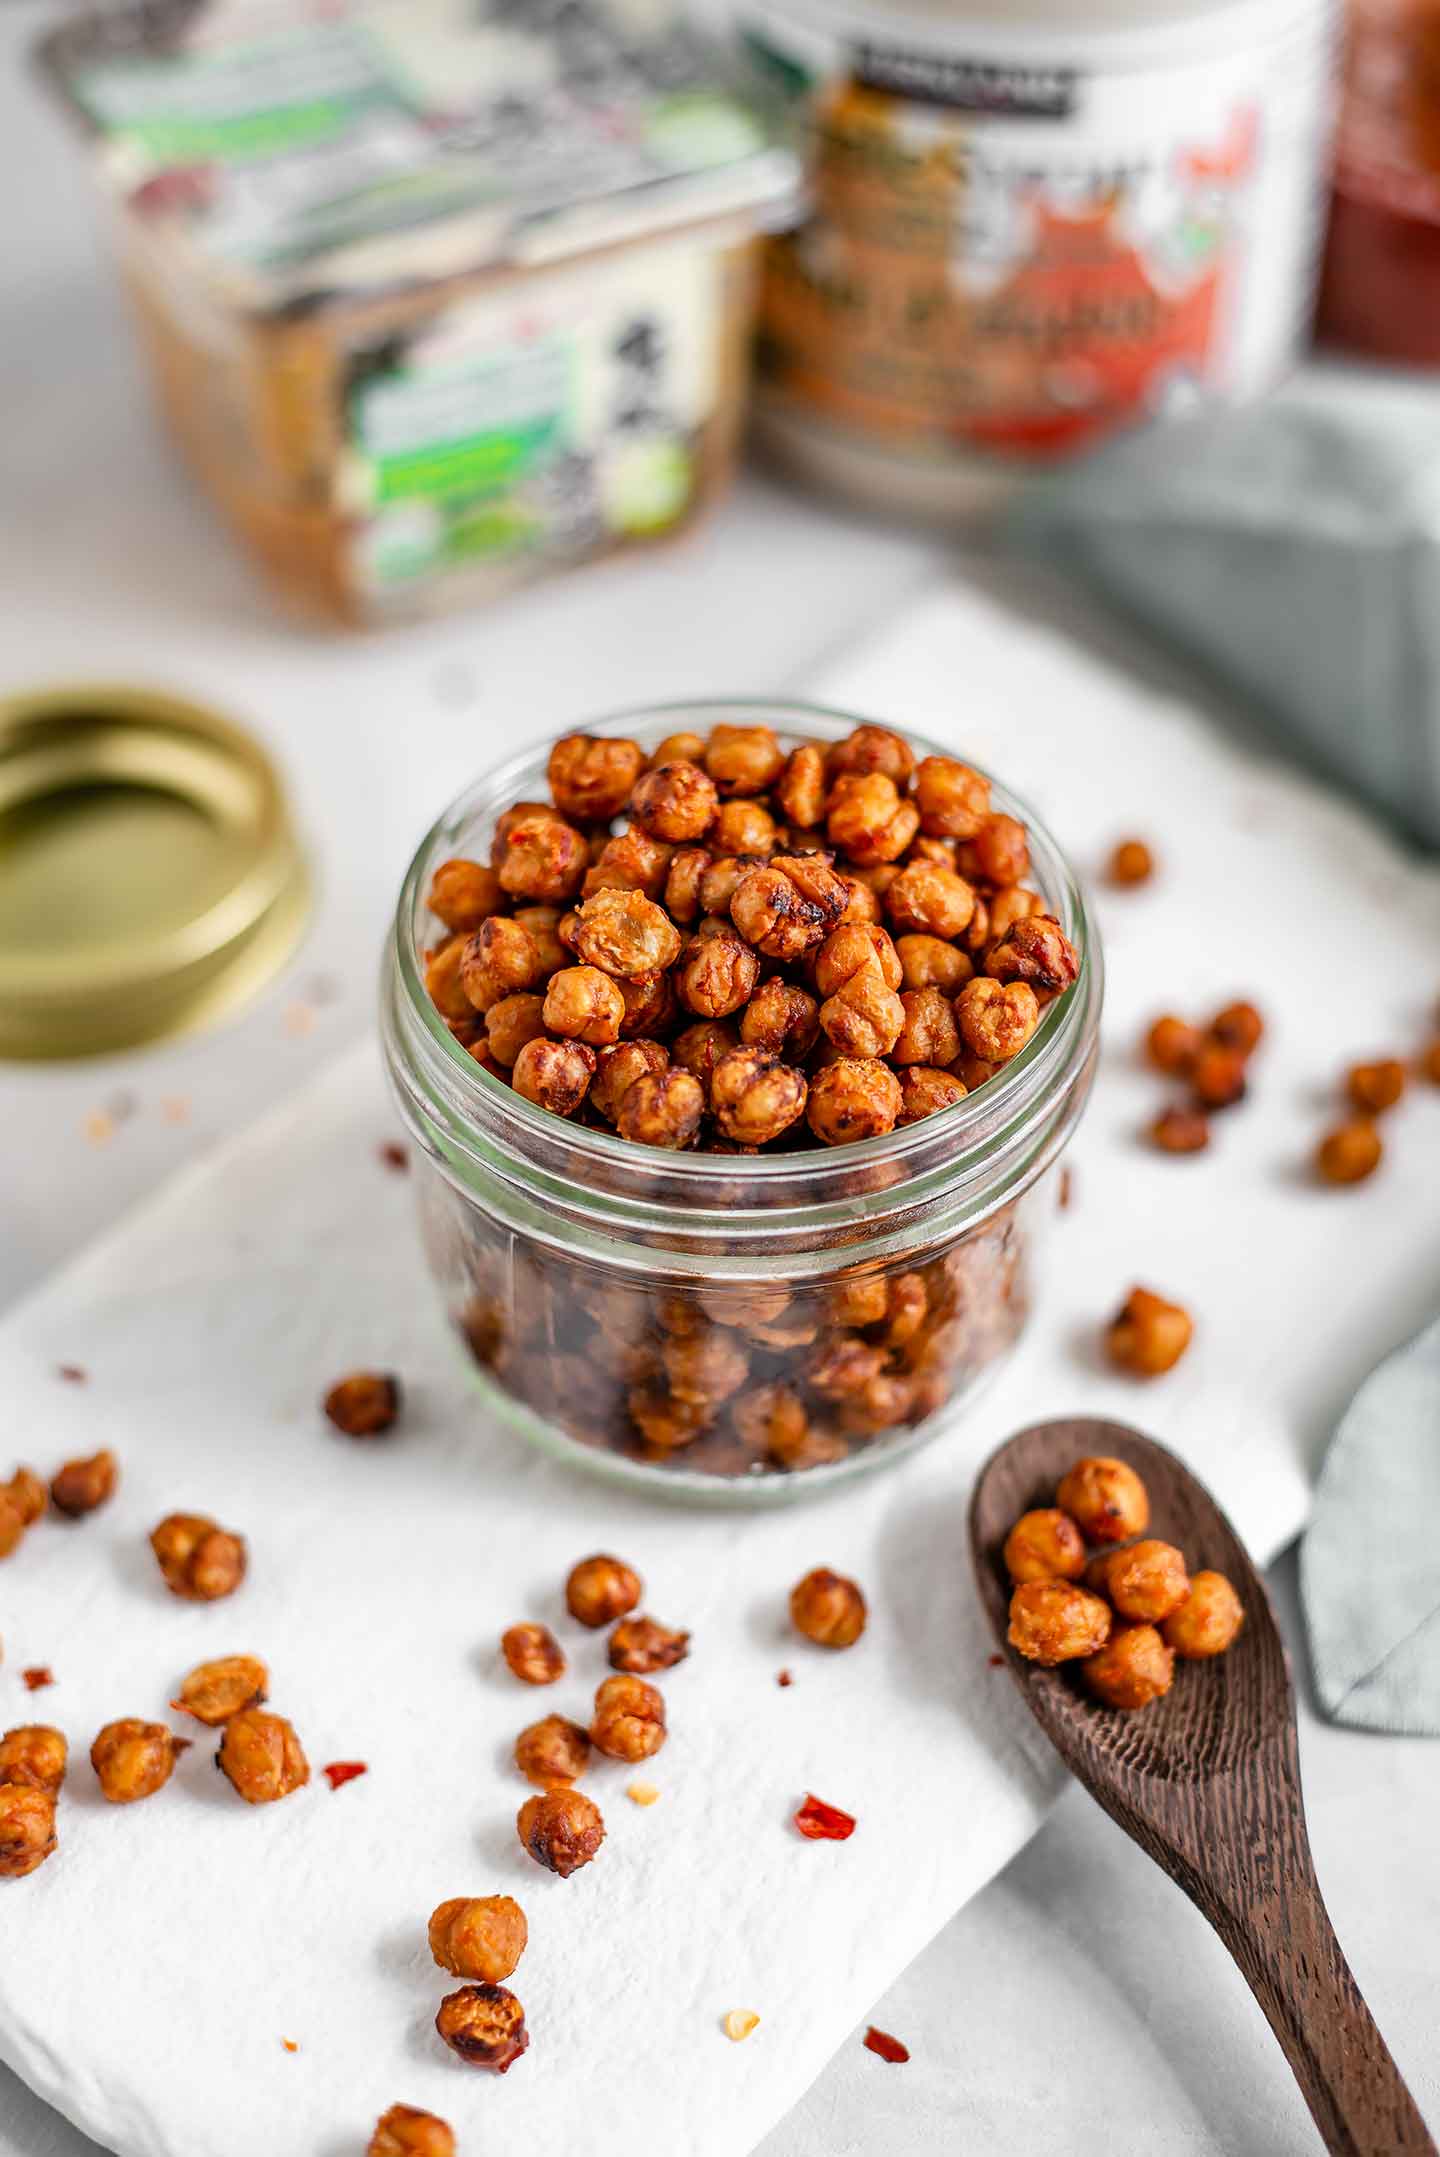 Side view of roasted chickpeas in a glass jar. Miso paste, chilli garlic sauce, and maple syrup are in the background.